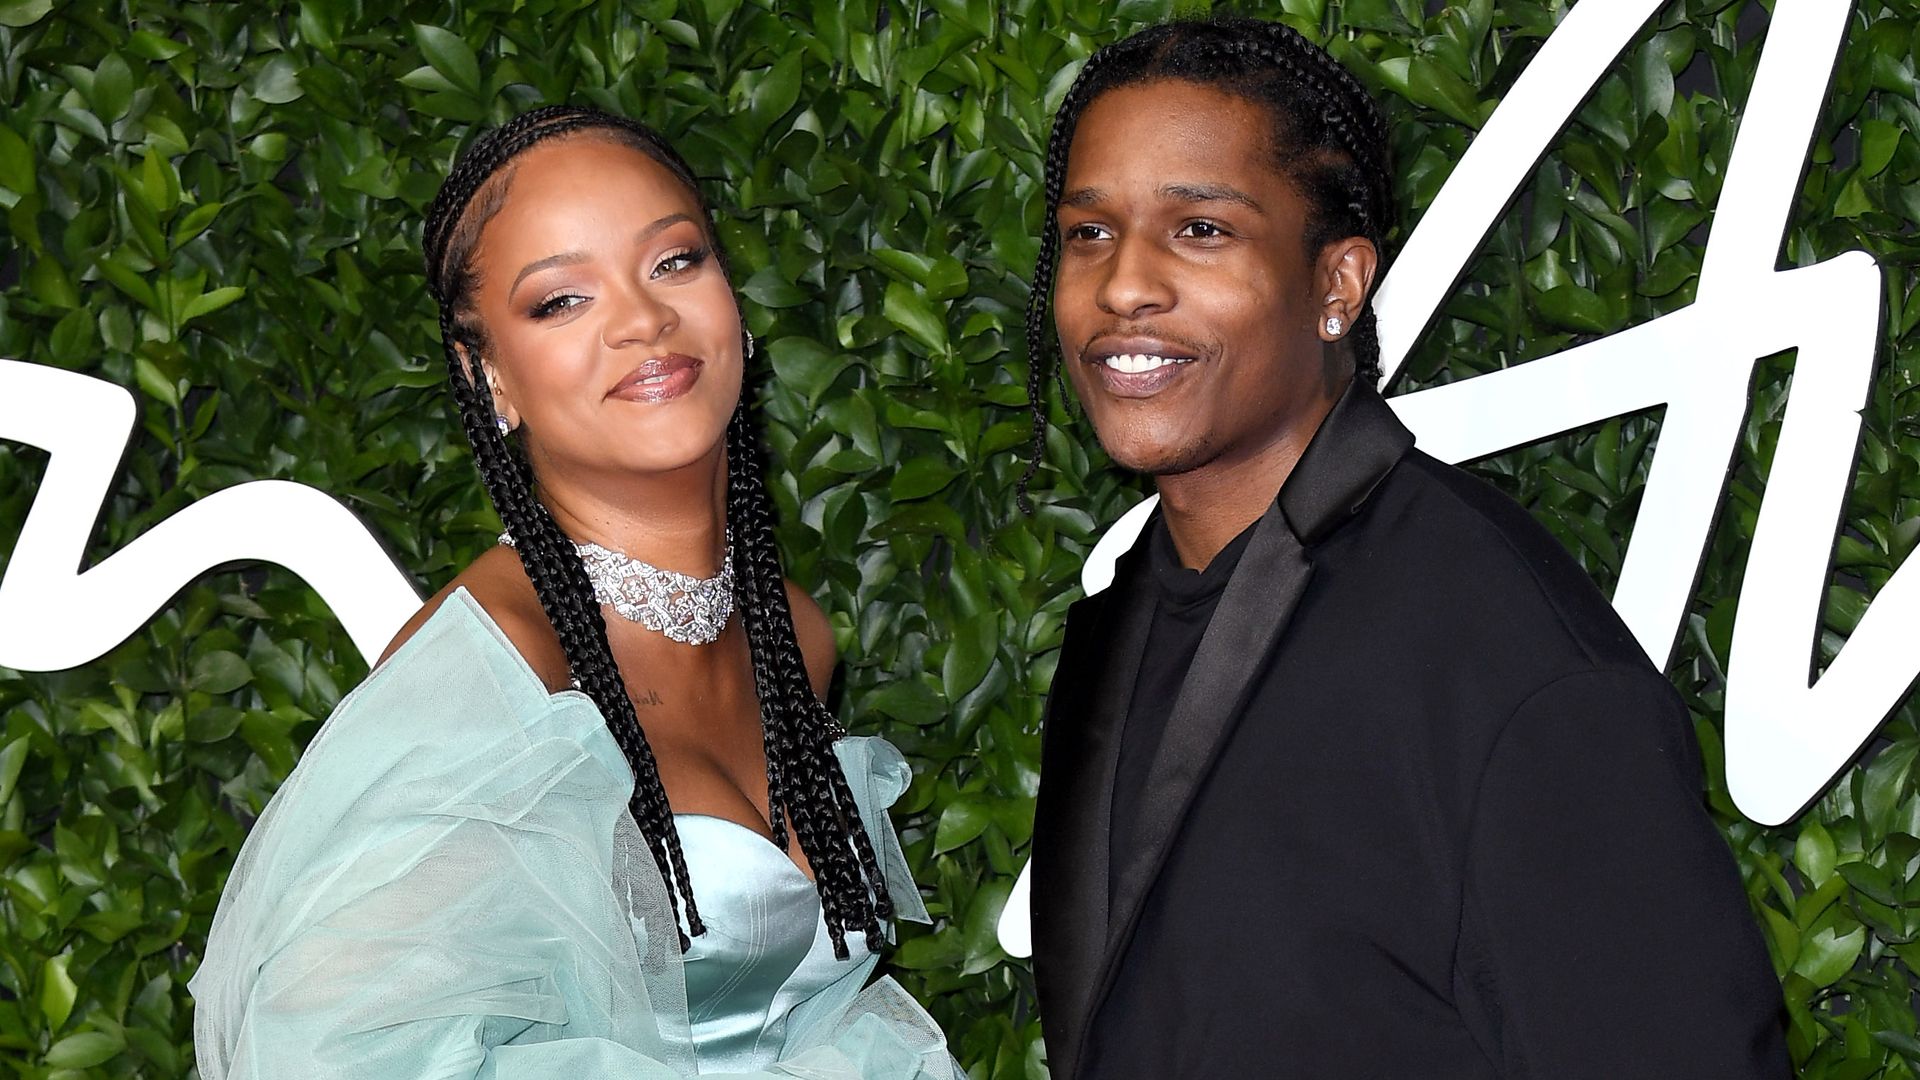 Rihanna and ASAP Rocky smiling at a red carpet event